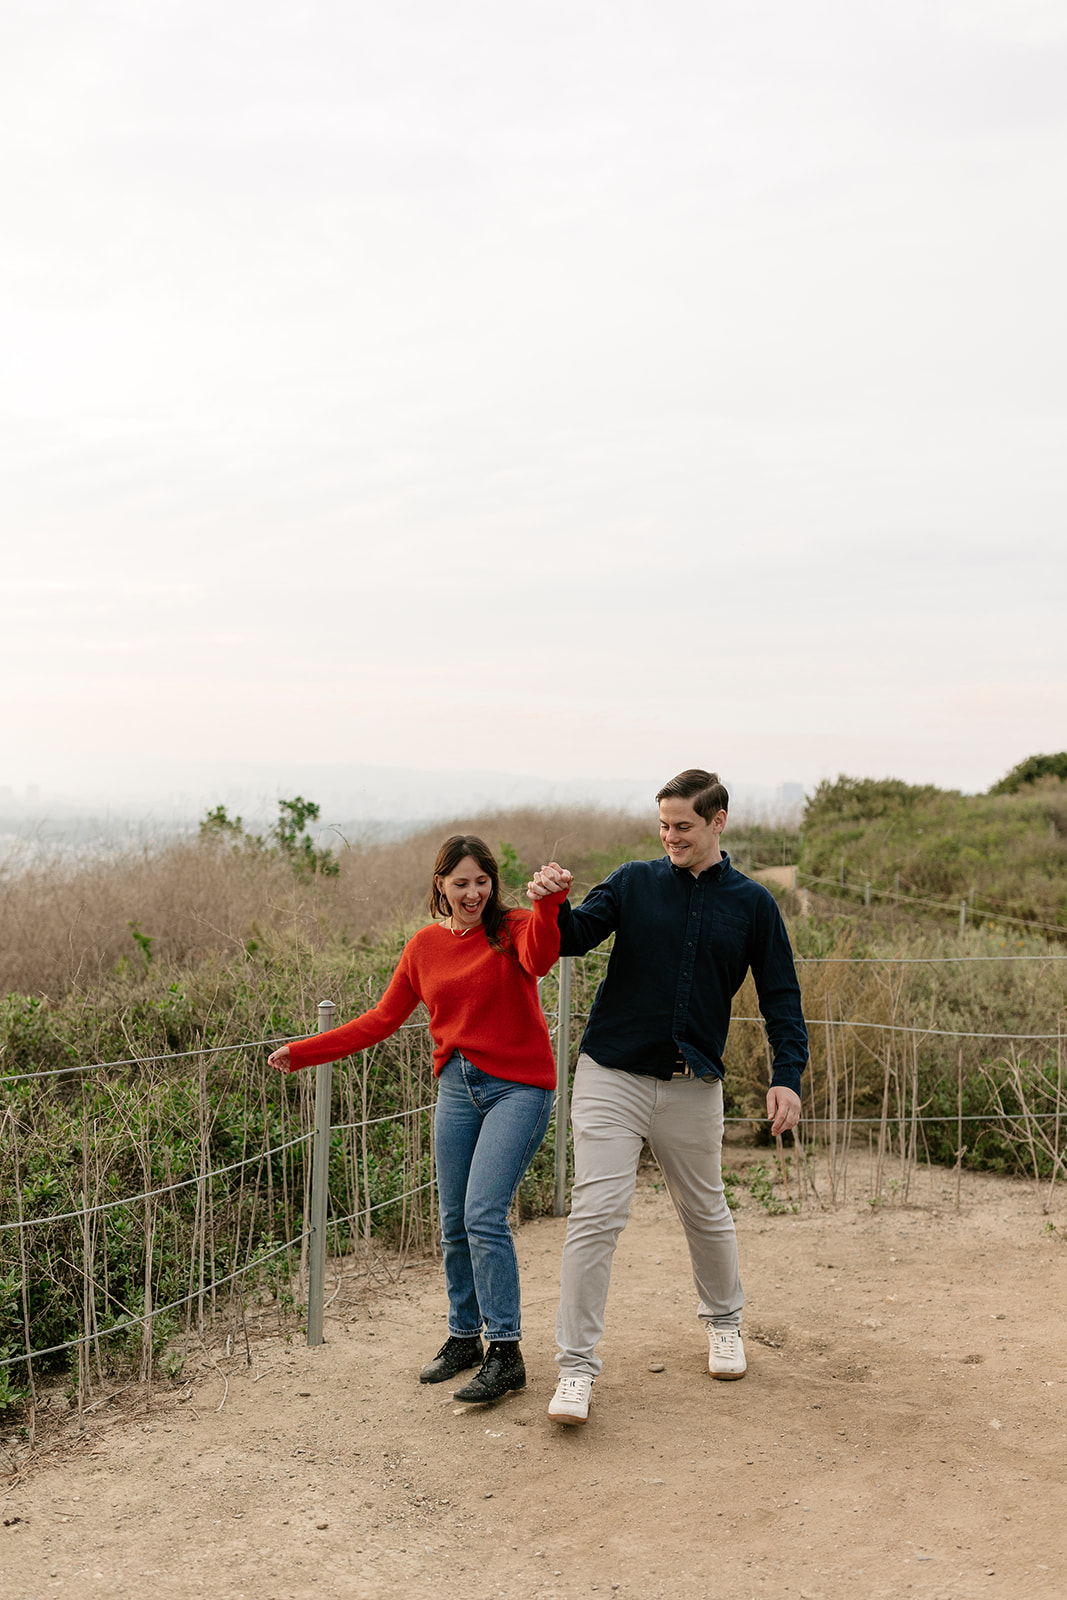 southern california socal baldwin hills park engagement photoshoot outfit inspo inspiration couples photoshoot couples